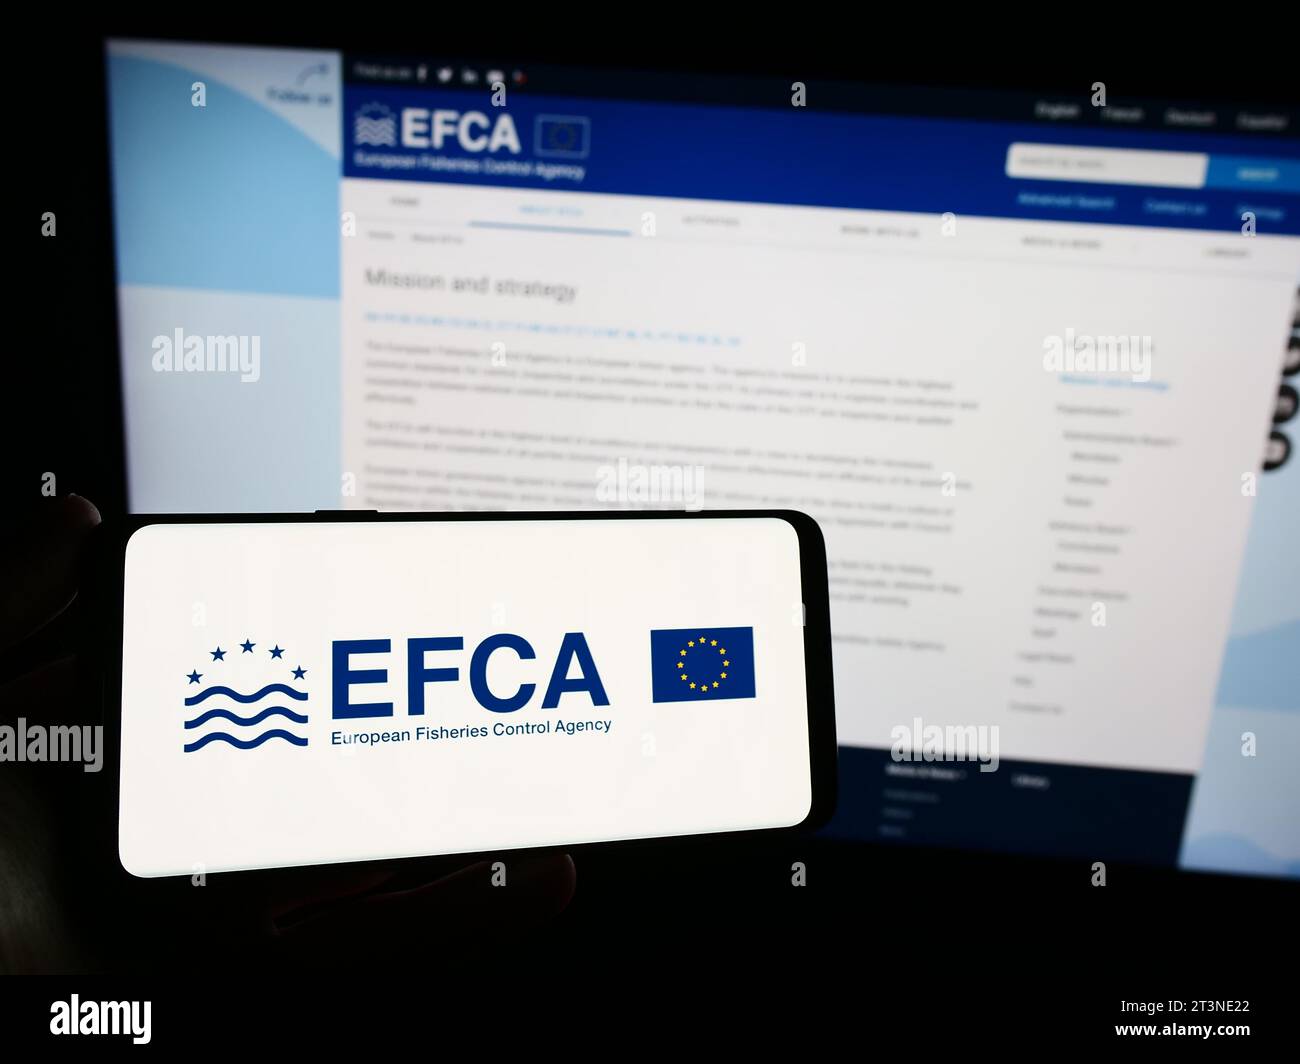 Person holding smartphone with logo of EU institution European Fisheries Control Agency (EFCA) in front of website. Focus on phone display. Stock Photo